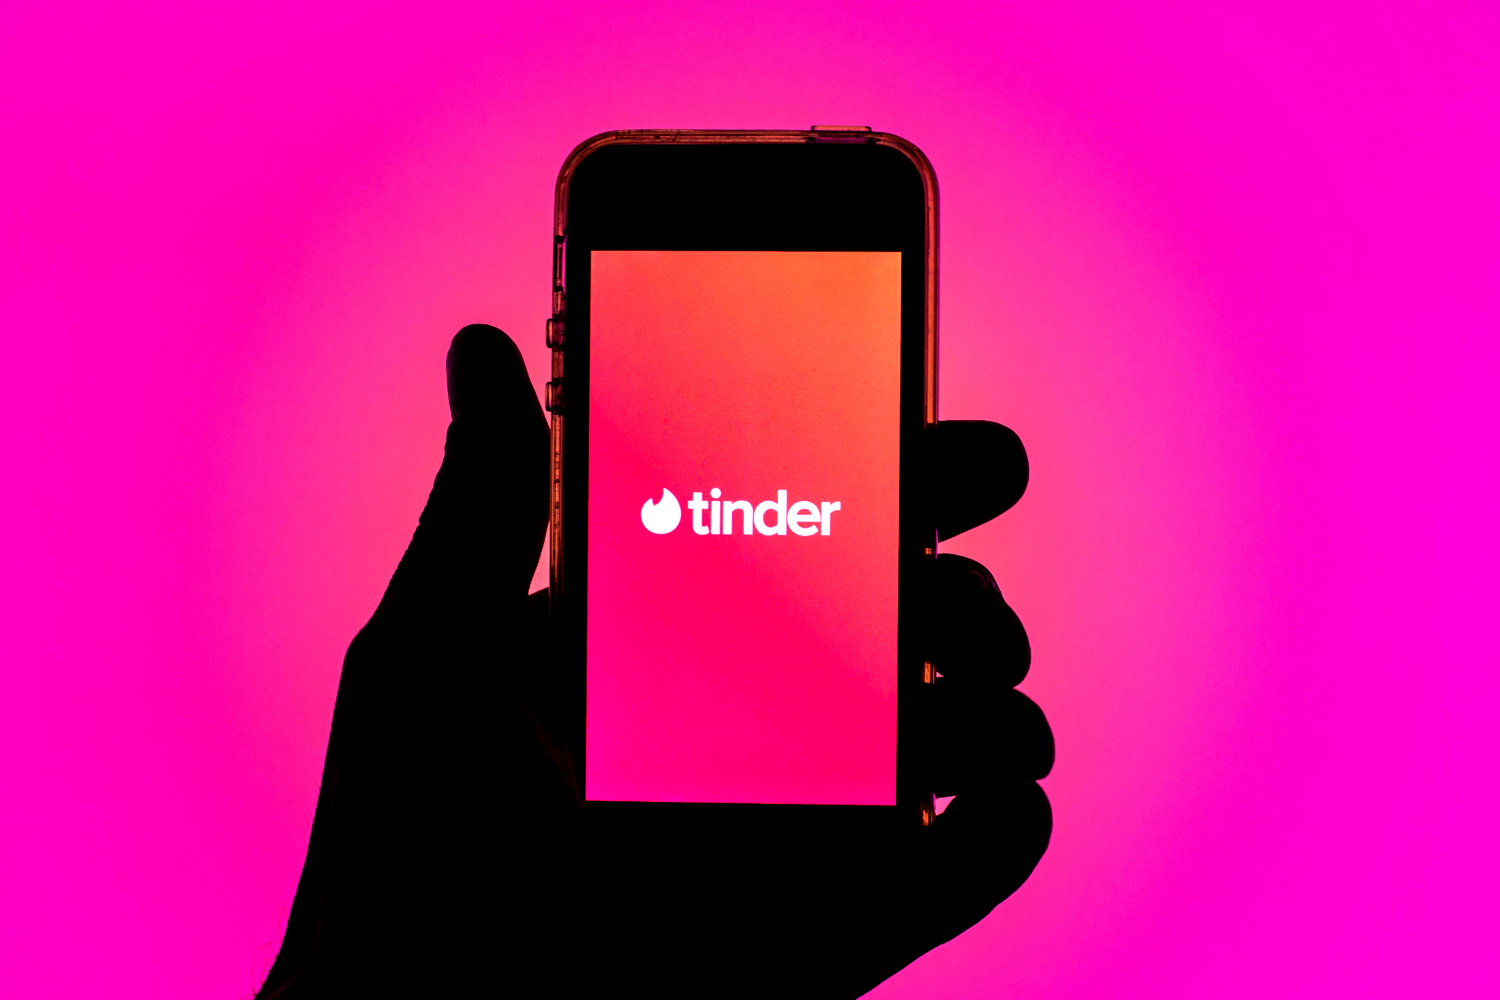 Tinder is changing, but the swipe-right era isn't over just yet. 